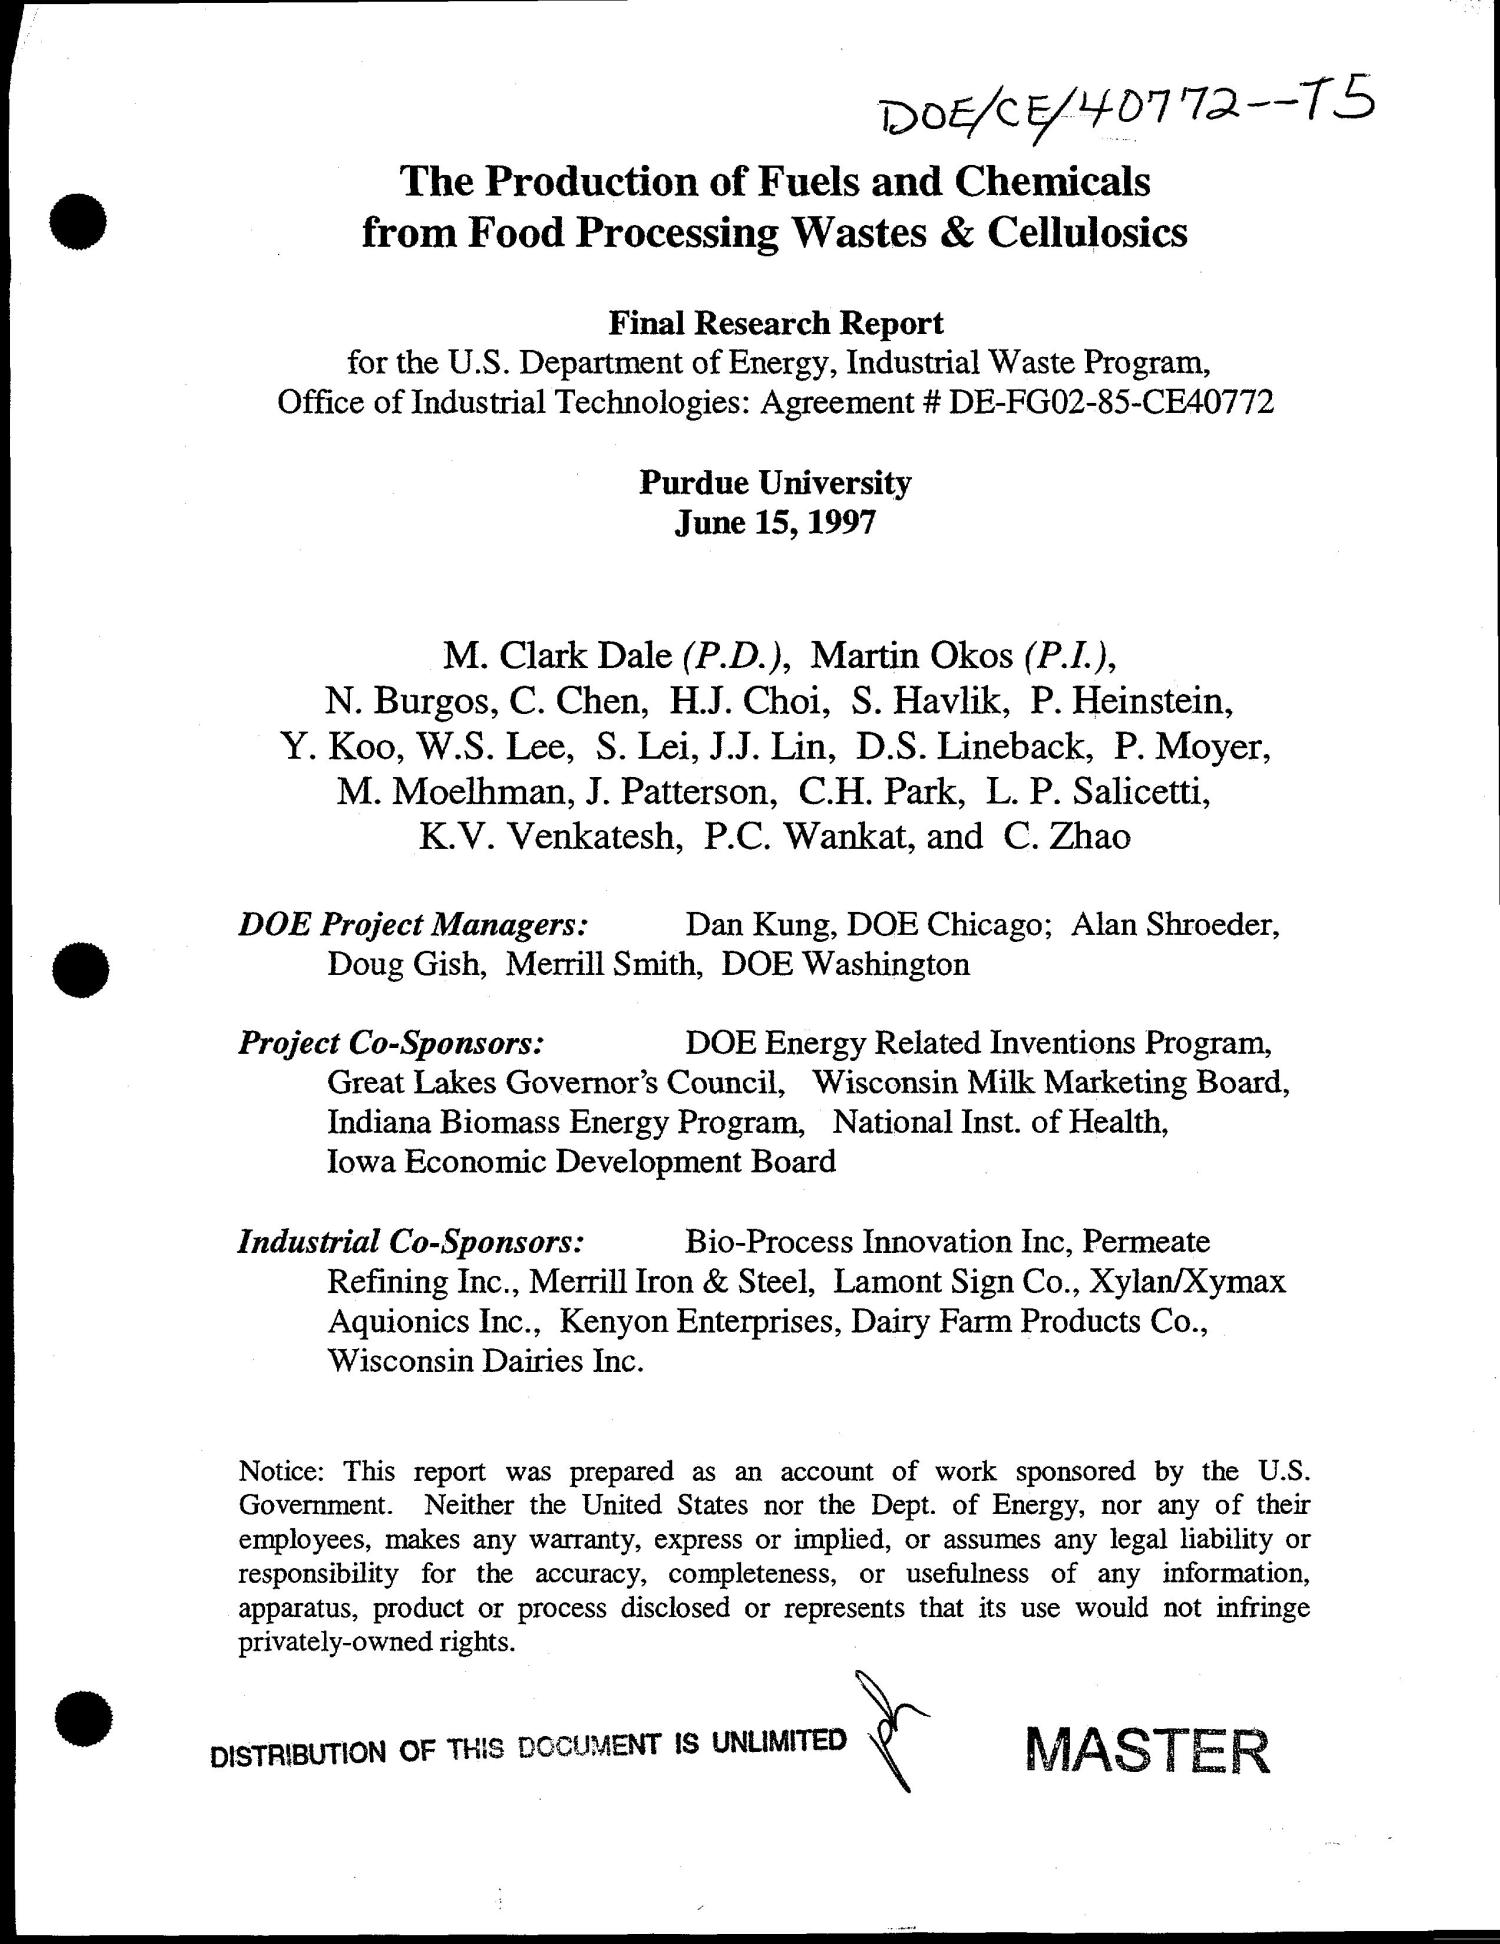 The Production Of Fuels And Chemicals From Food Processing Wastes Cellulosics Final Research Report Unt Digital Library